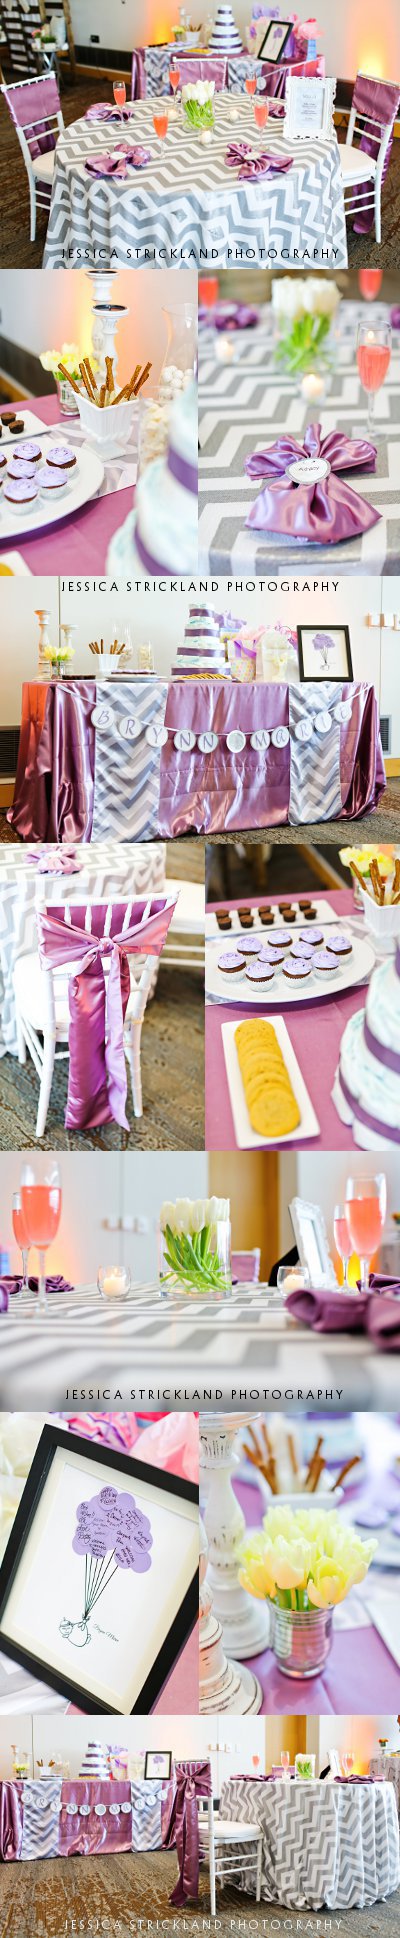 Art of the Table 2014 Ruffles and Roses Baby Shower Table Design